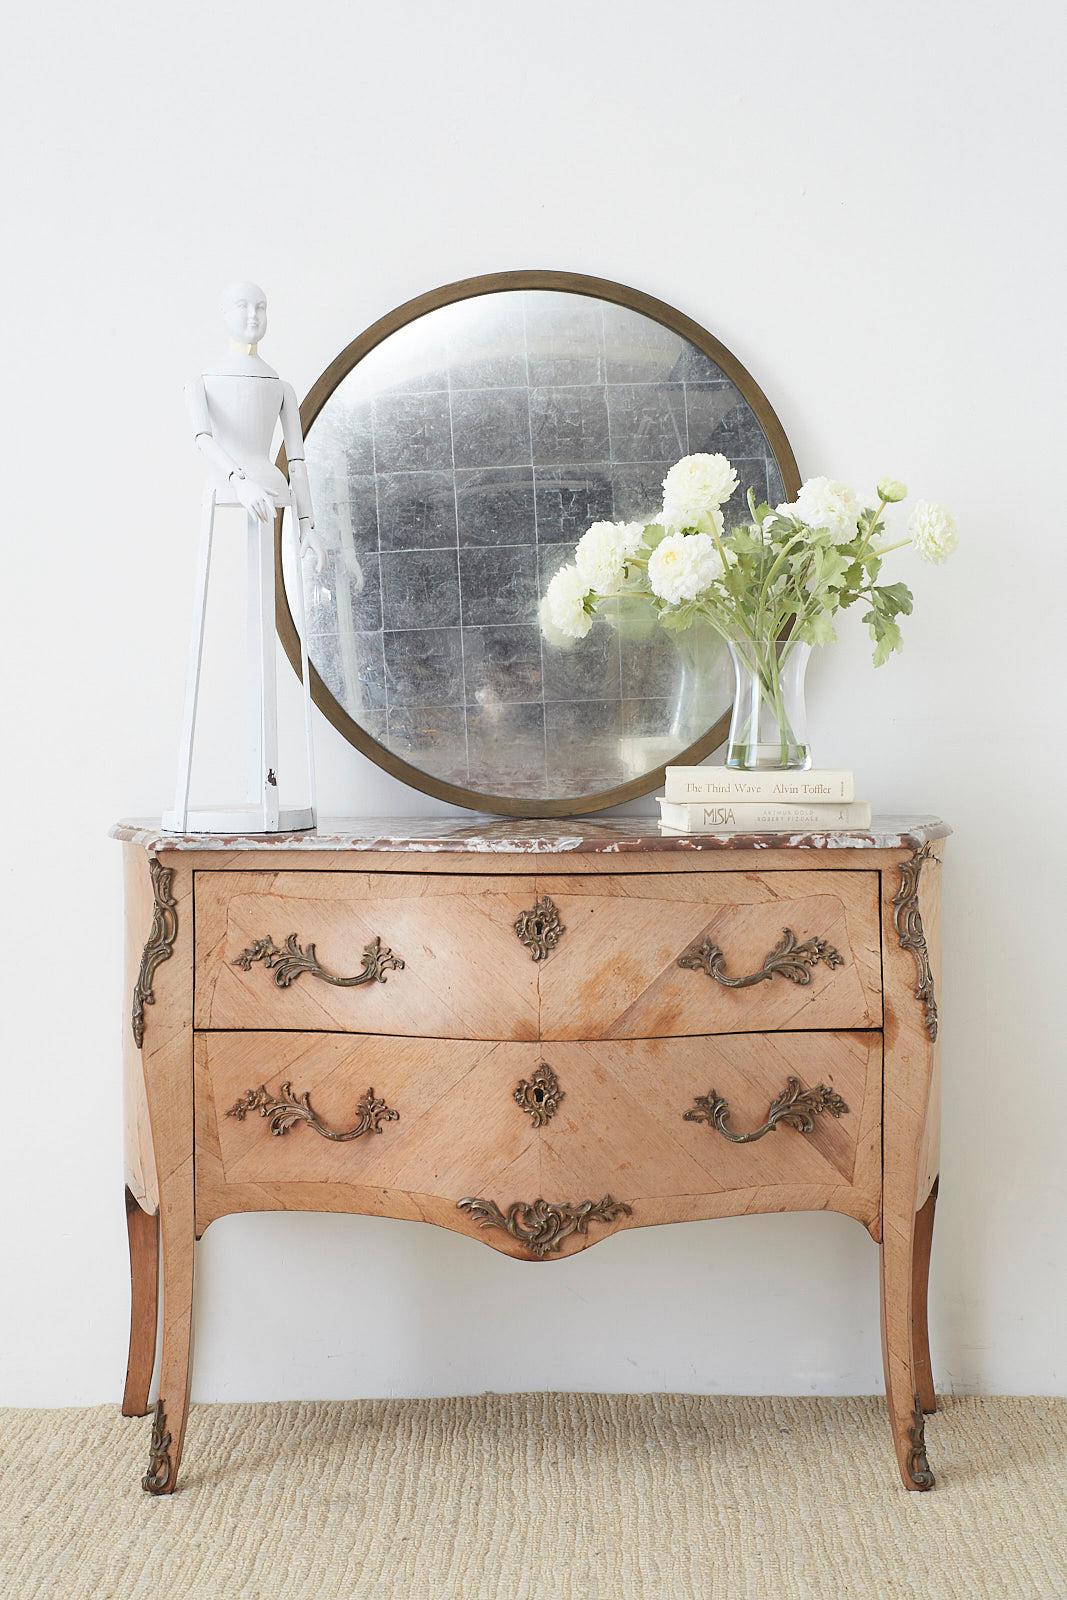 Beautifully faded French bombe chest, dresser, or commode featuring a variegated marble top. Made in the Louis XV taste and embellished with bronze mounts and pulls. The chest has a faded patina on the veneered surfaces showcasing the lovely grain